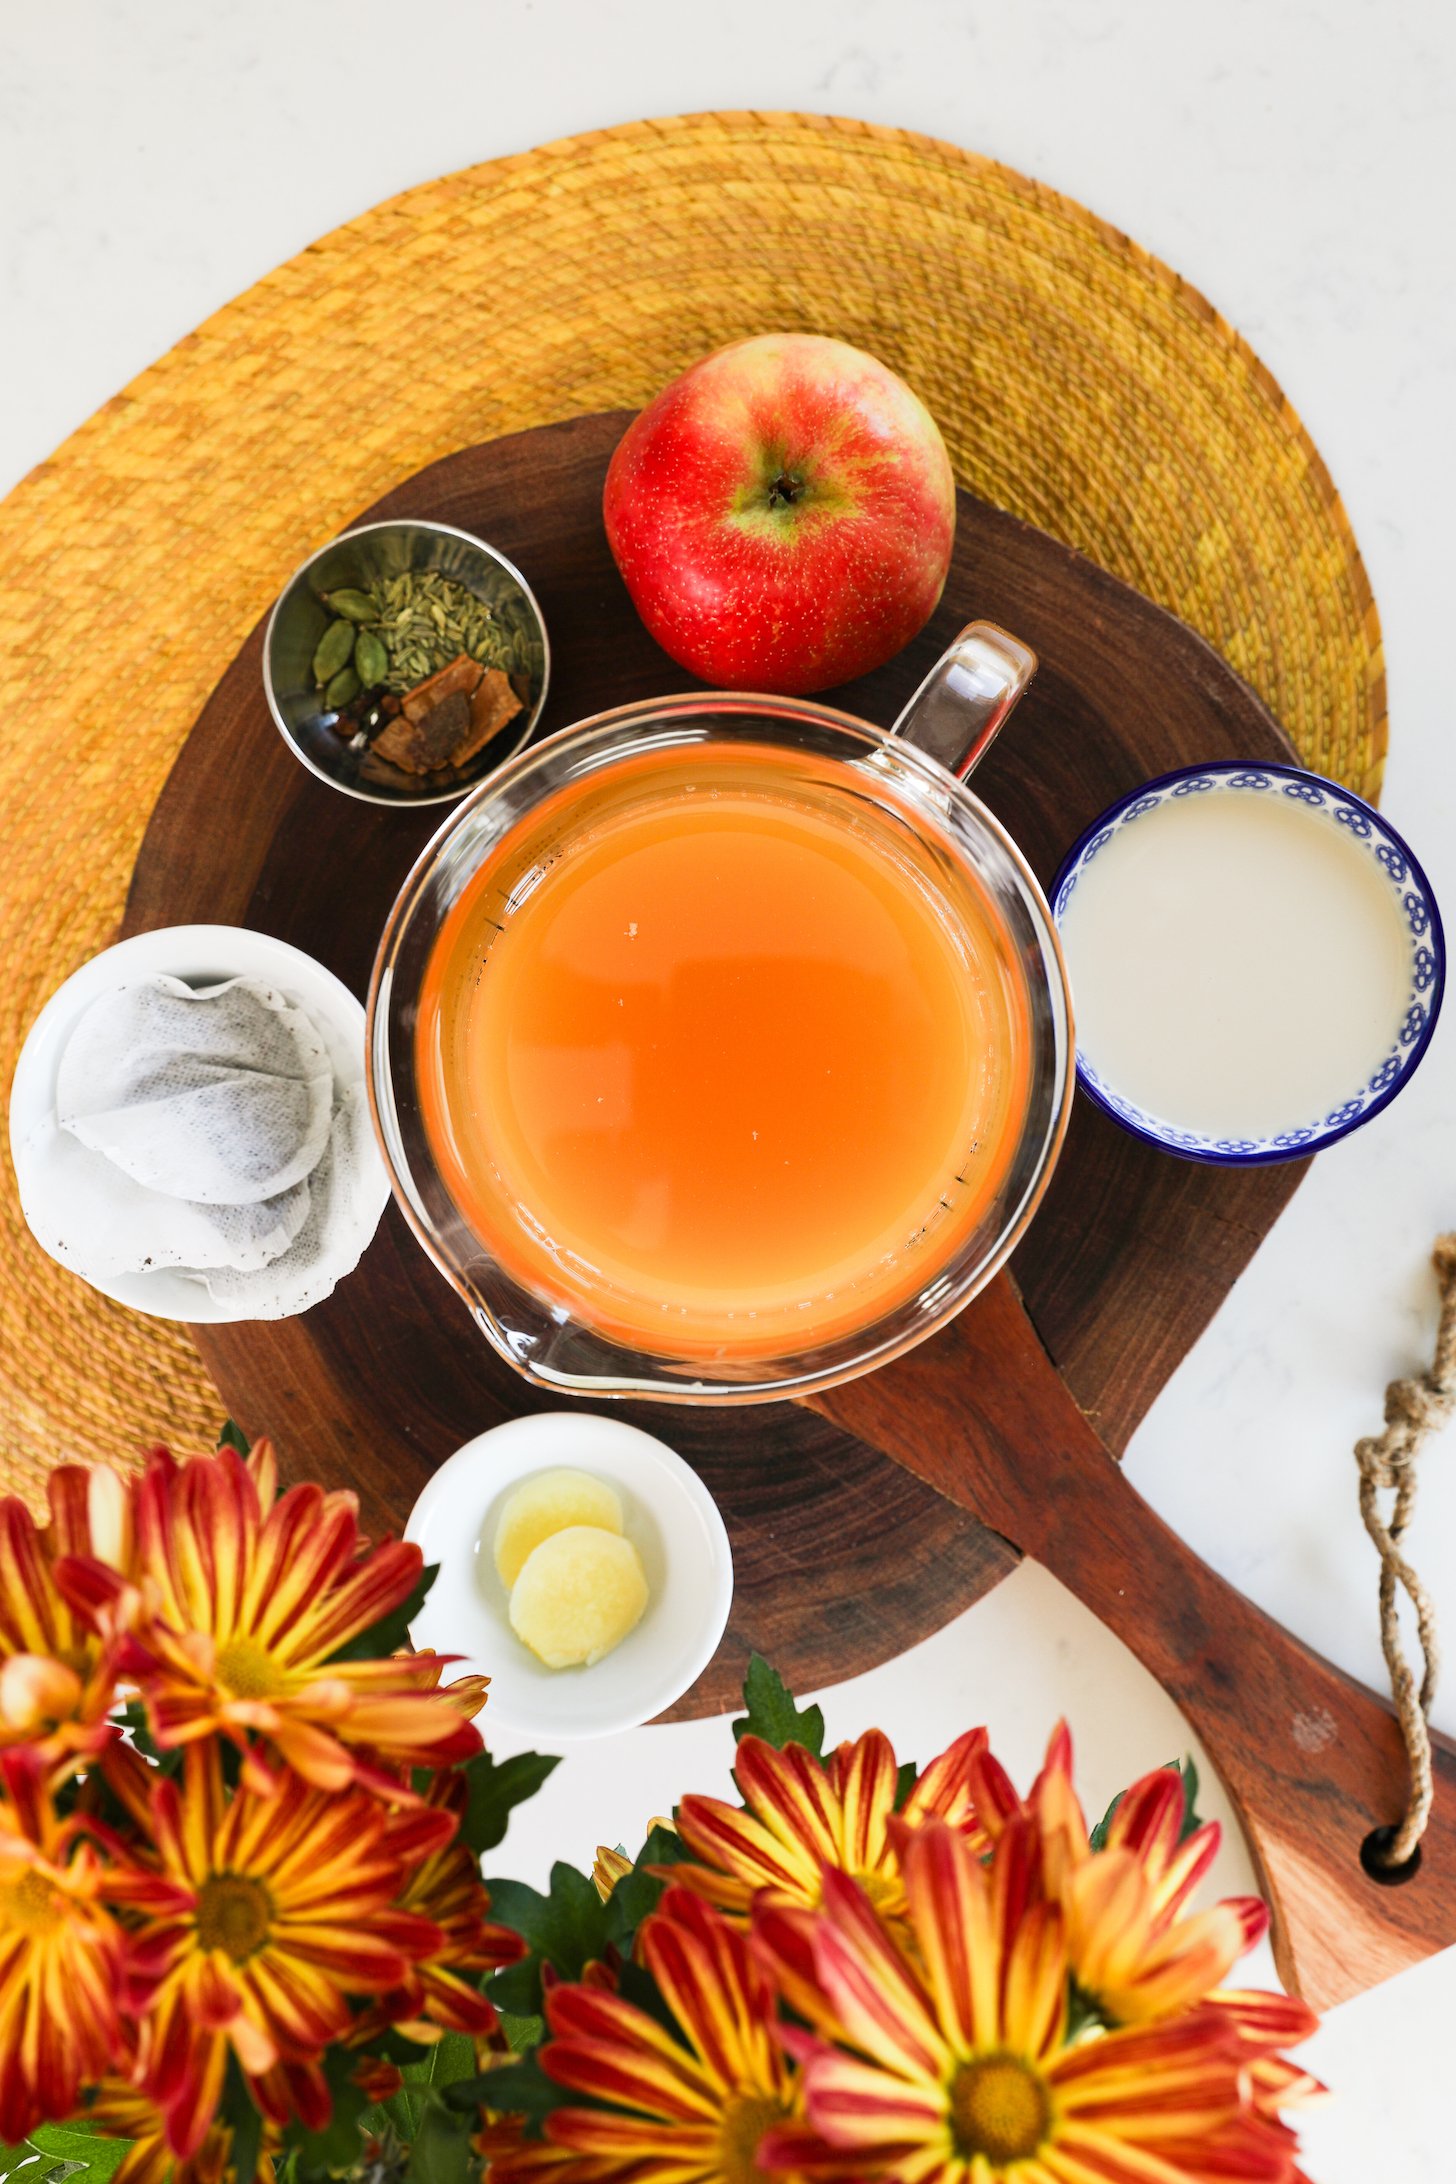 Styled food ingredients on a wooden board: apple cider, tea bags, milk, apples, and spices.